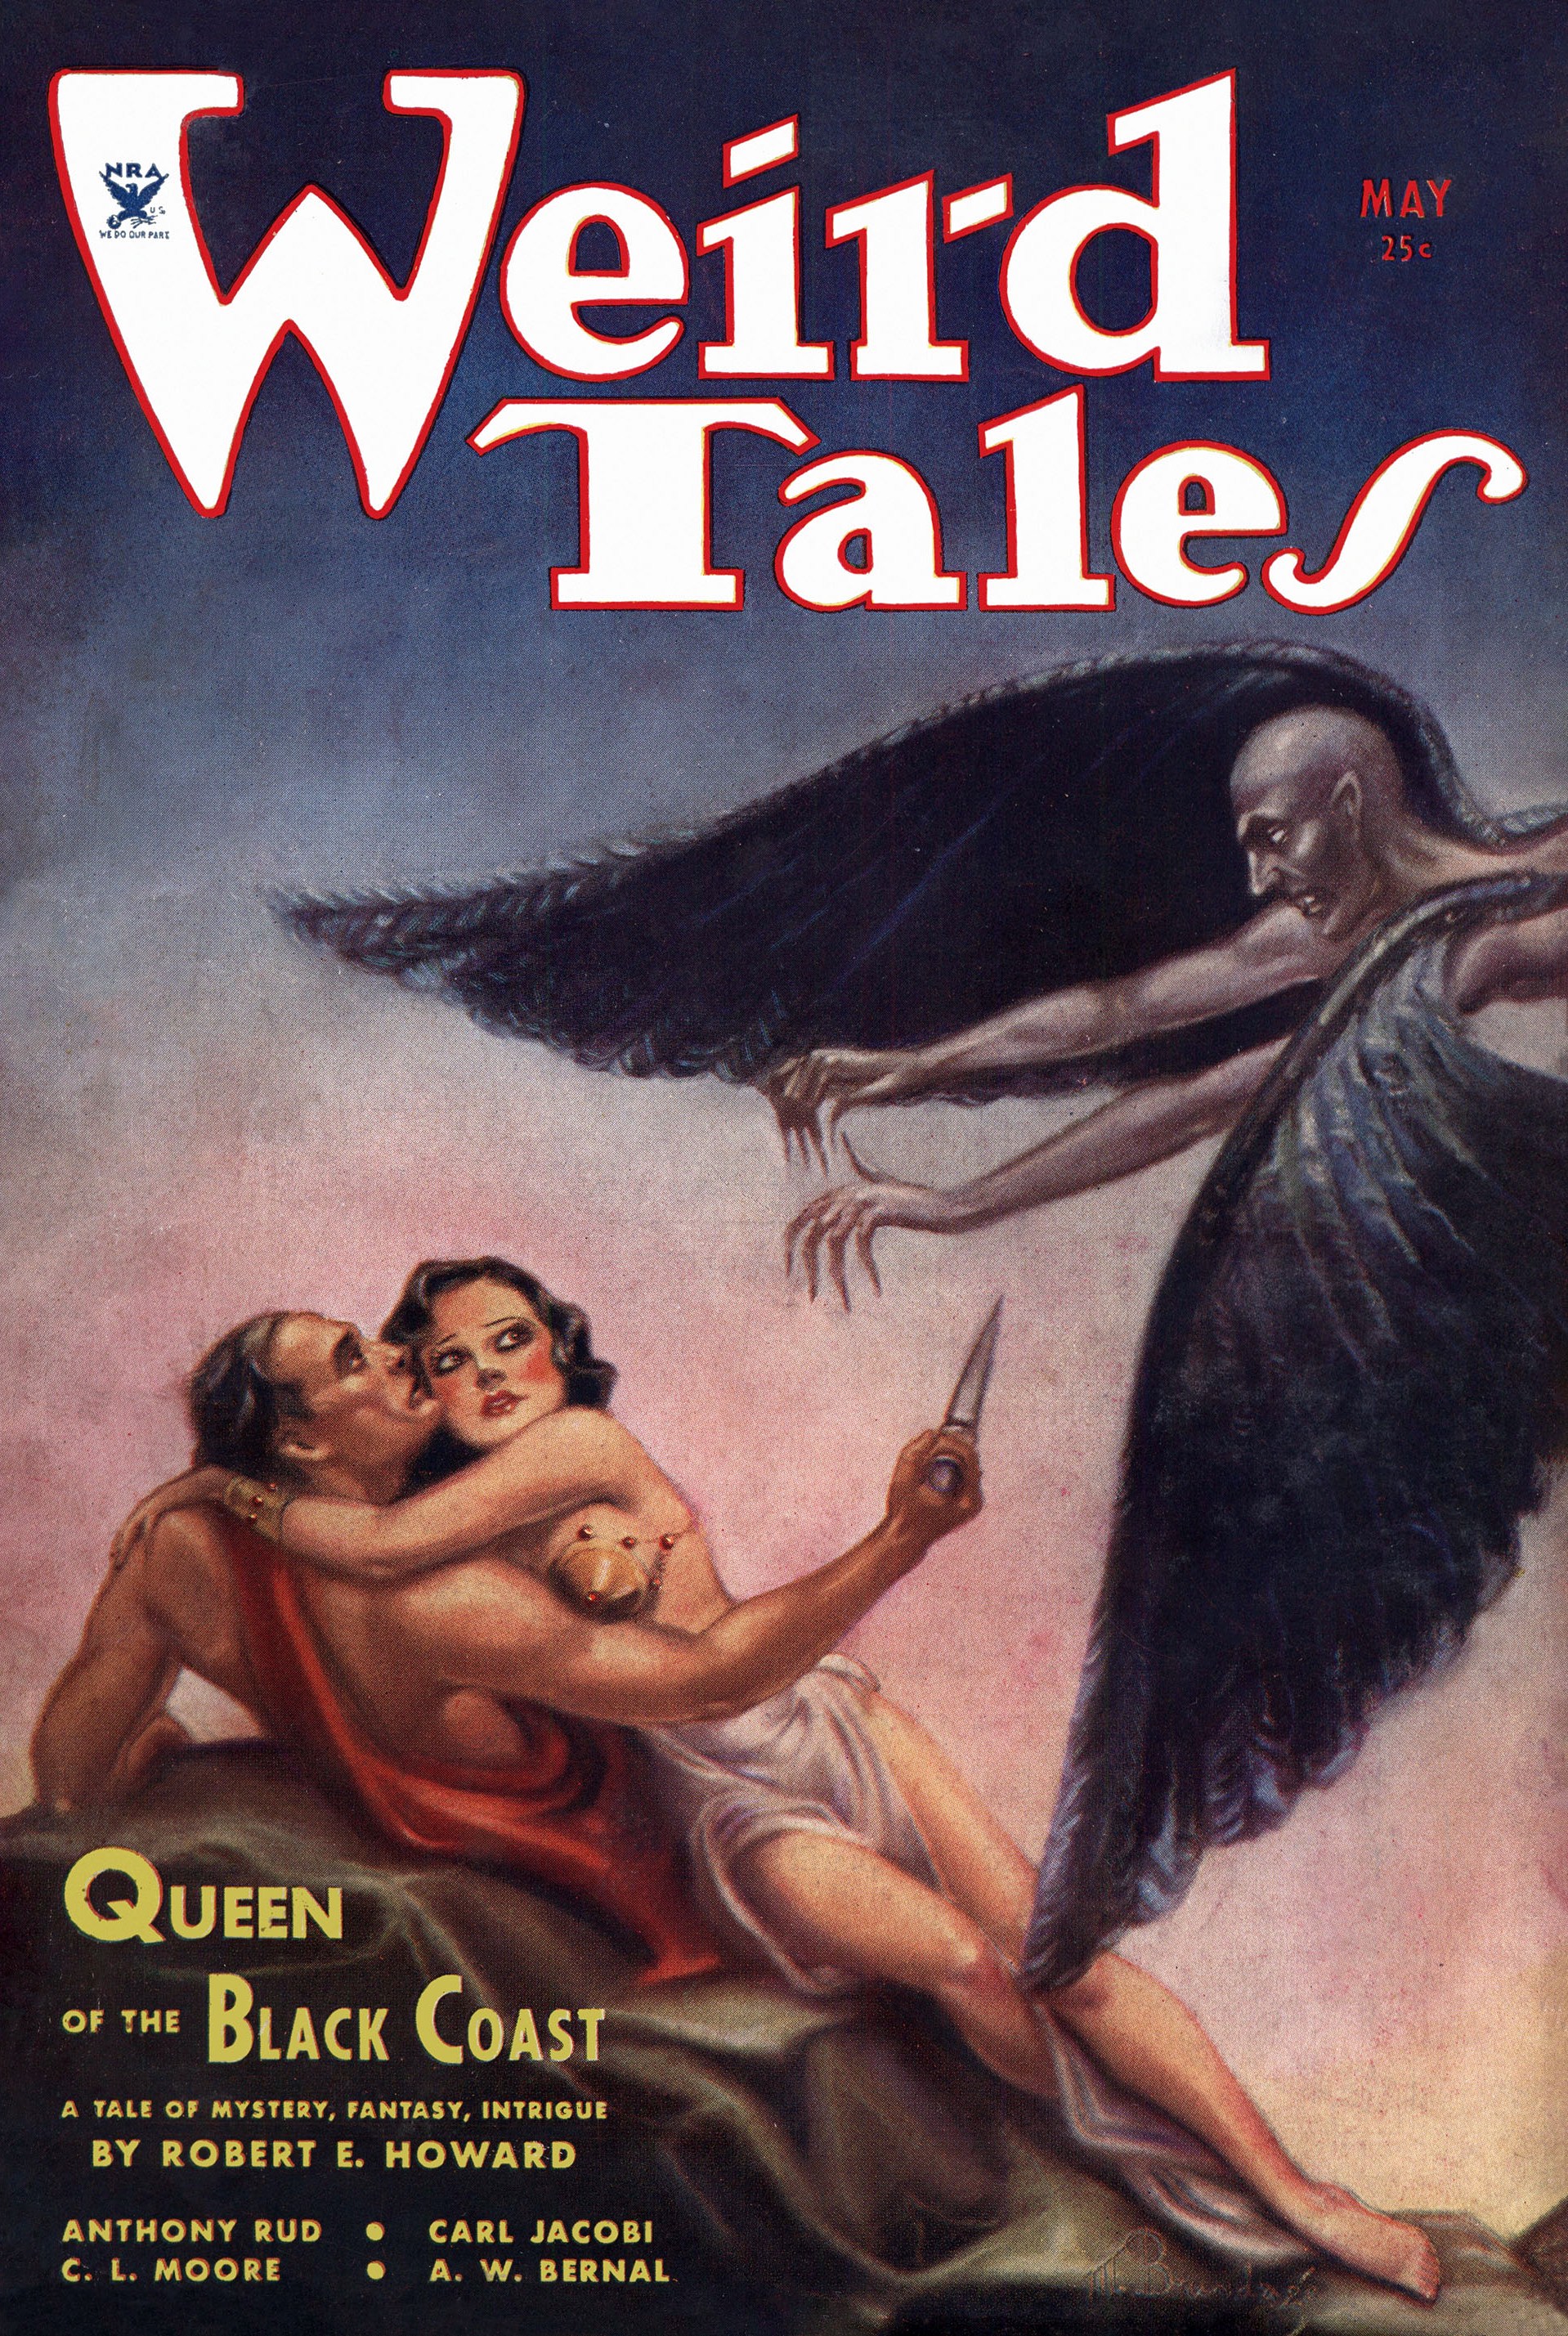 Image - Queen of the Black Coast by Robert E. Howard